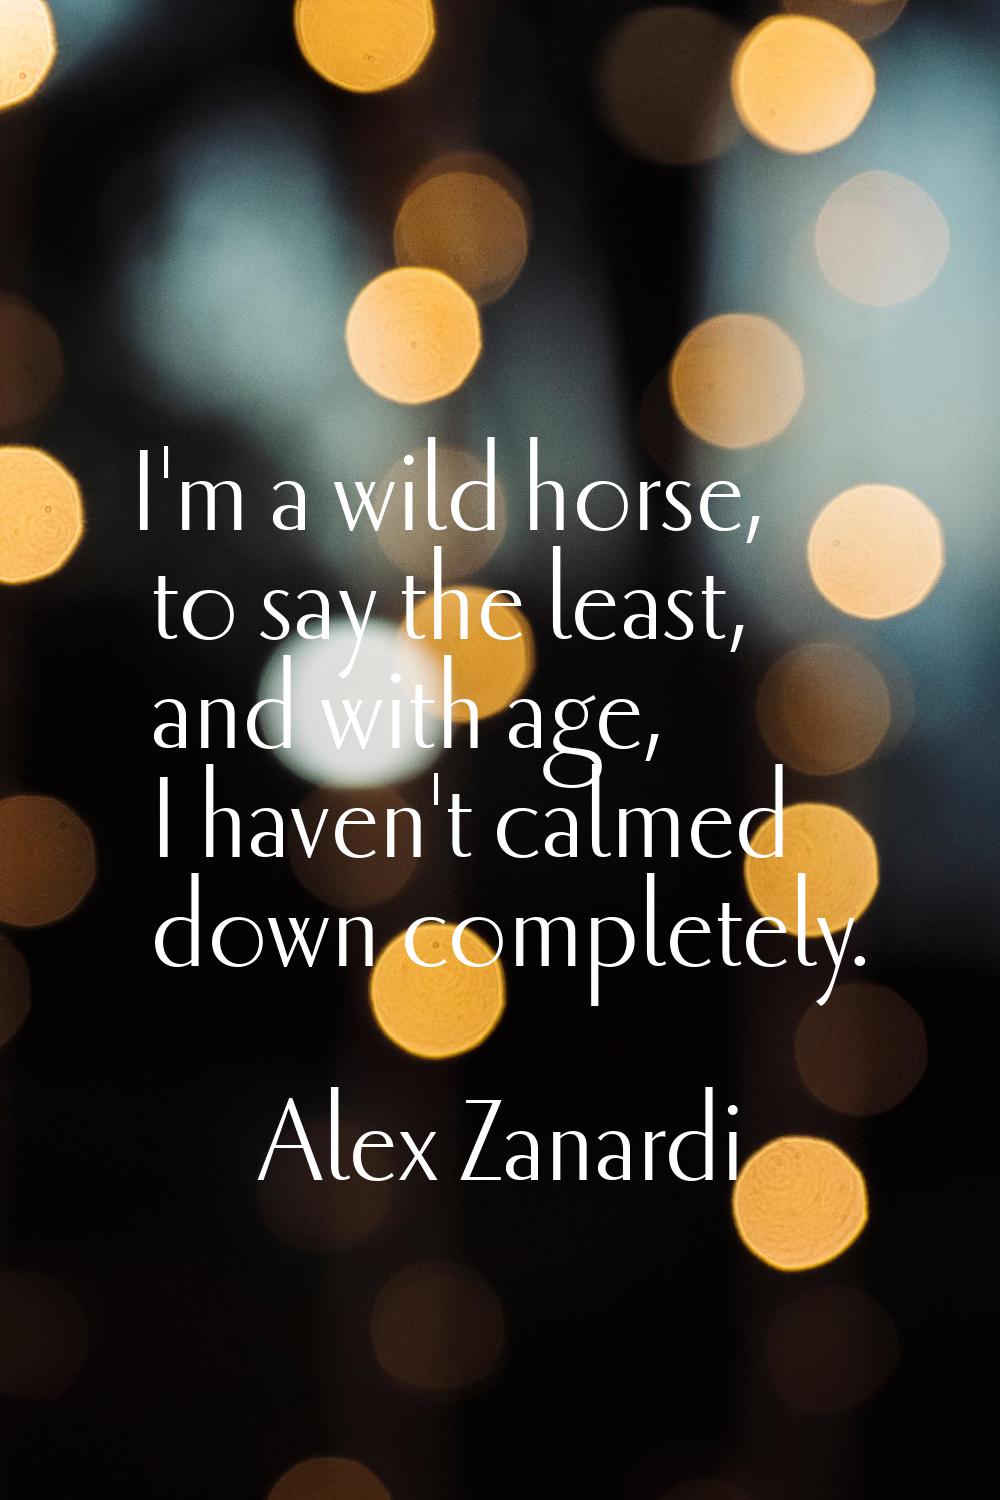 I'm a wild horse, to say the least, and with age, I haven't calmed down completely.